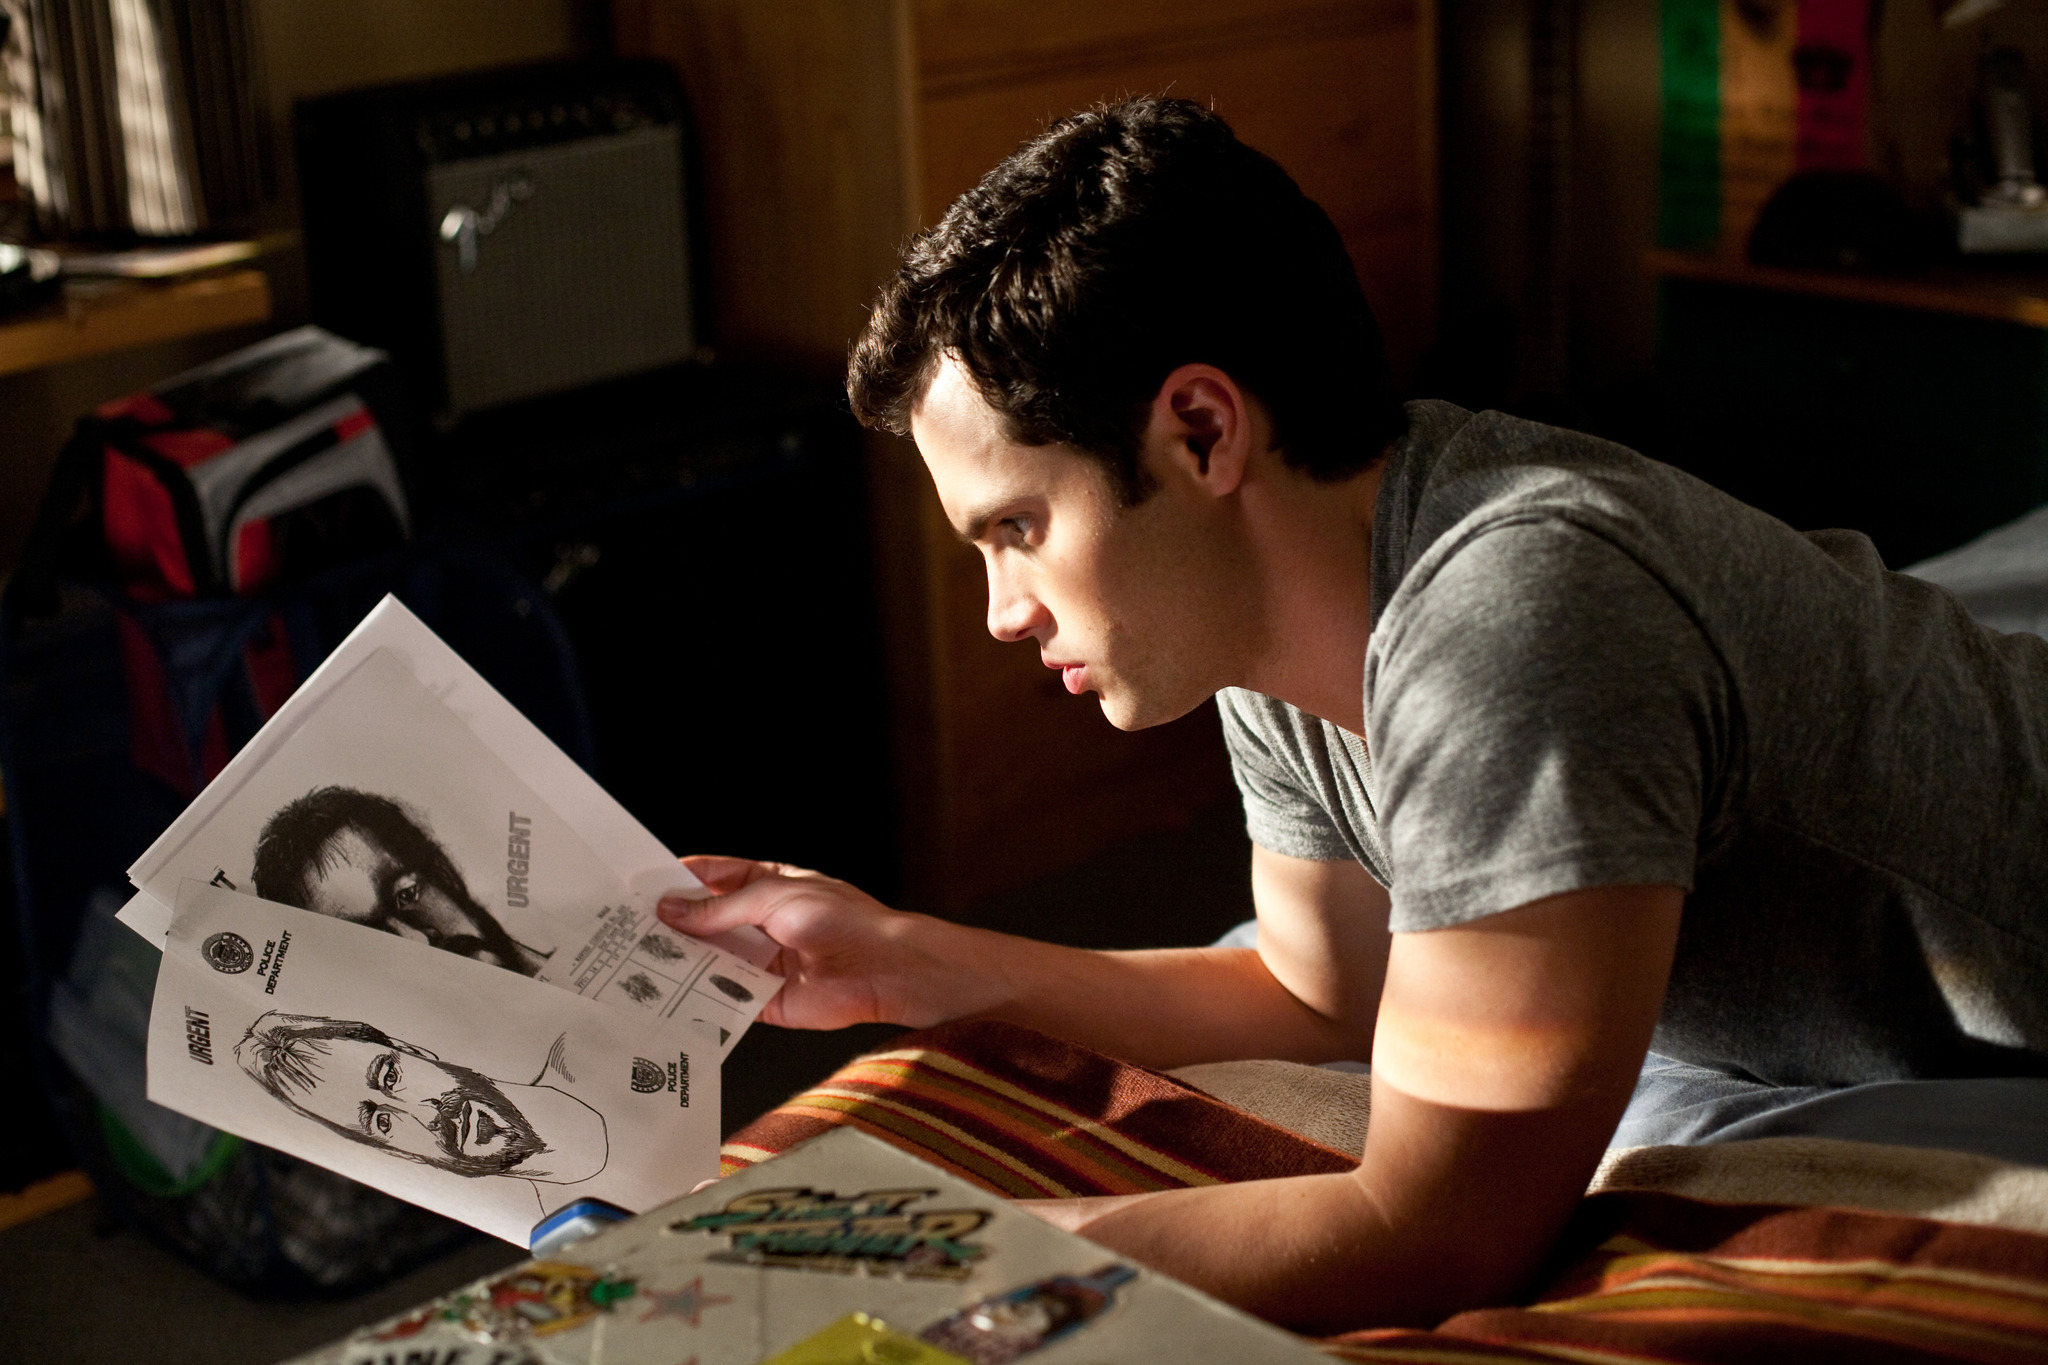 Still of Penn Badgley in The Stepfather (2009)